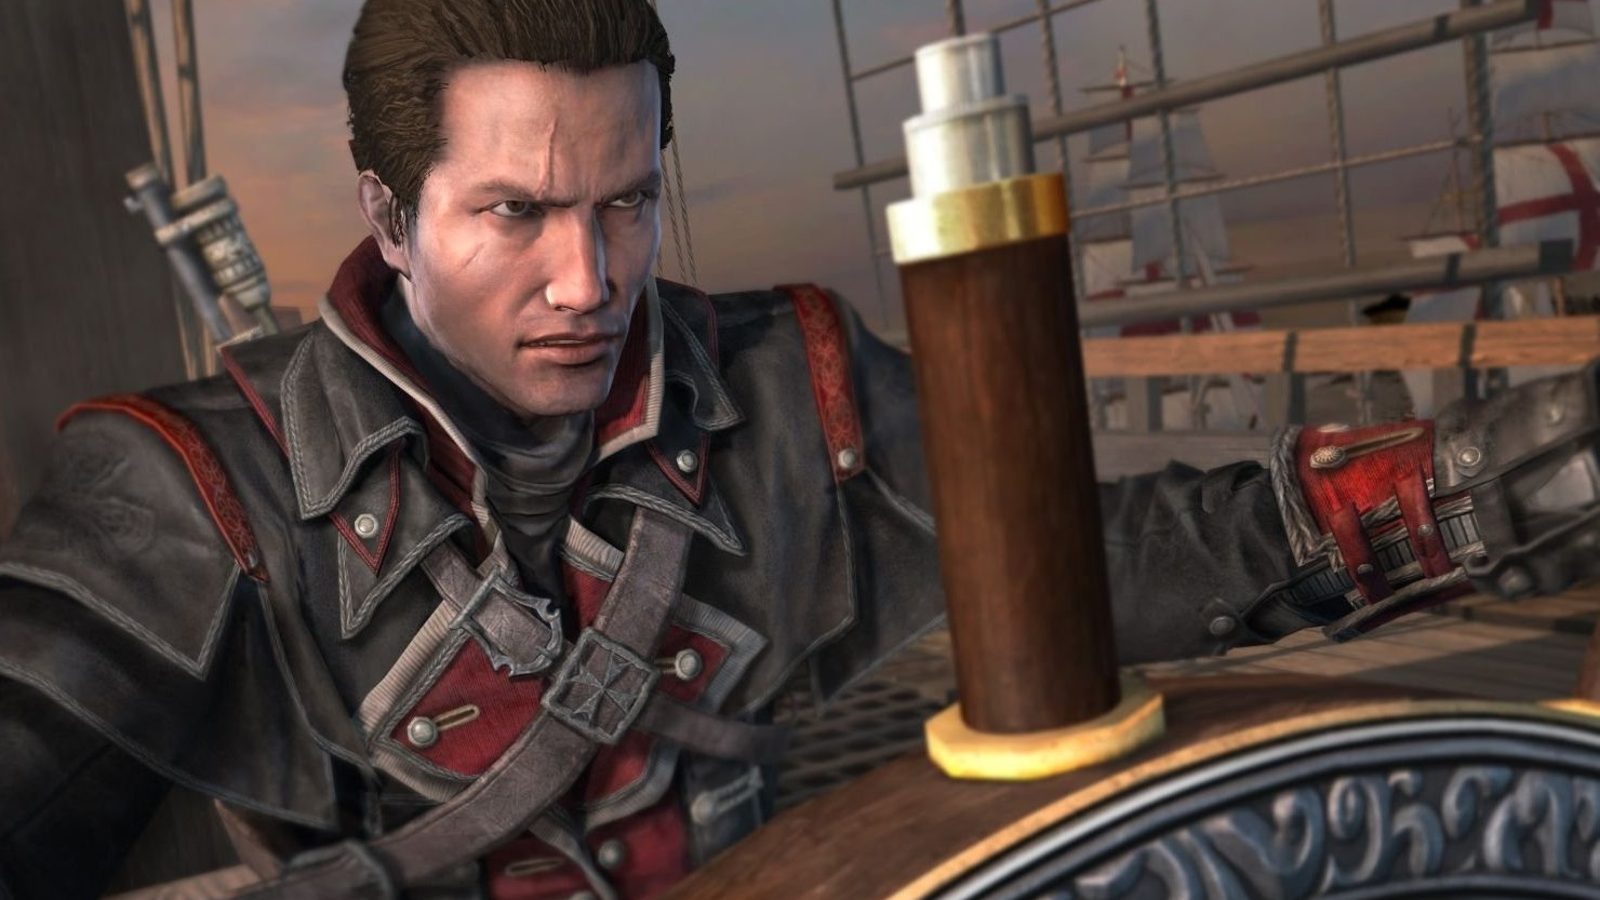 Assassin's Creed: Rogue is more than the cash-grab it could have been